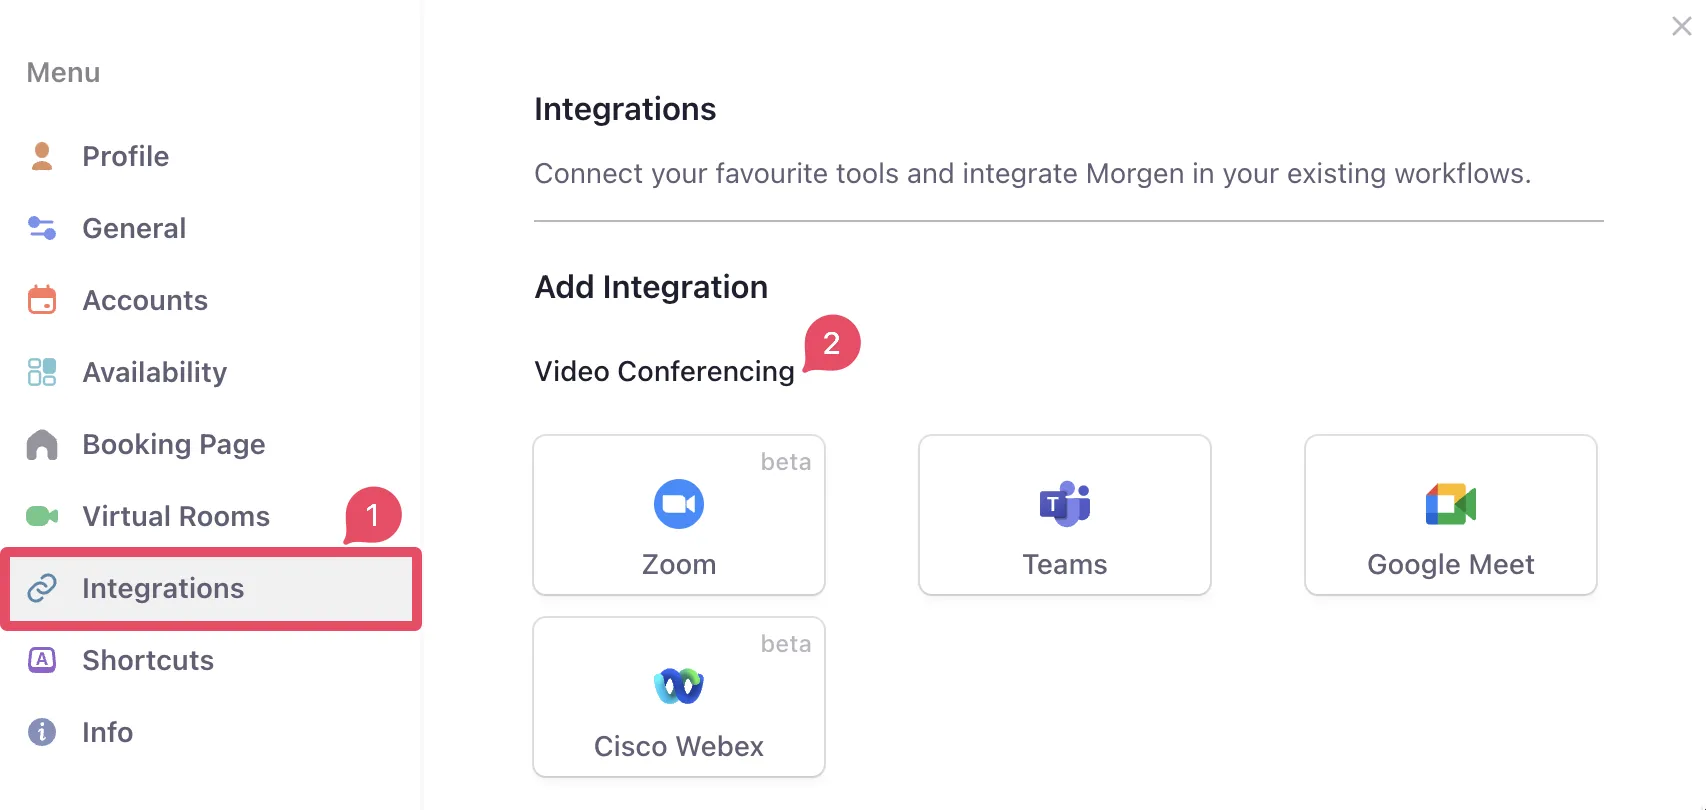 Connecting virtual meet apps with Morgen